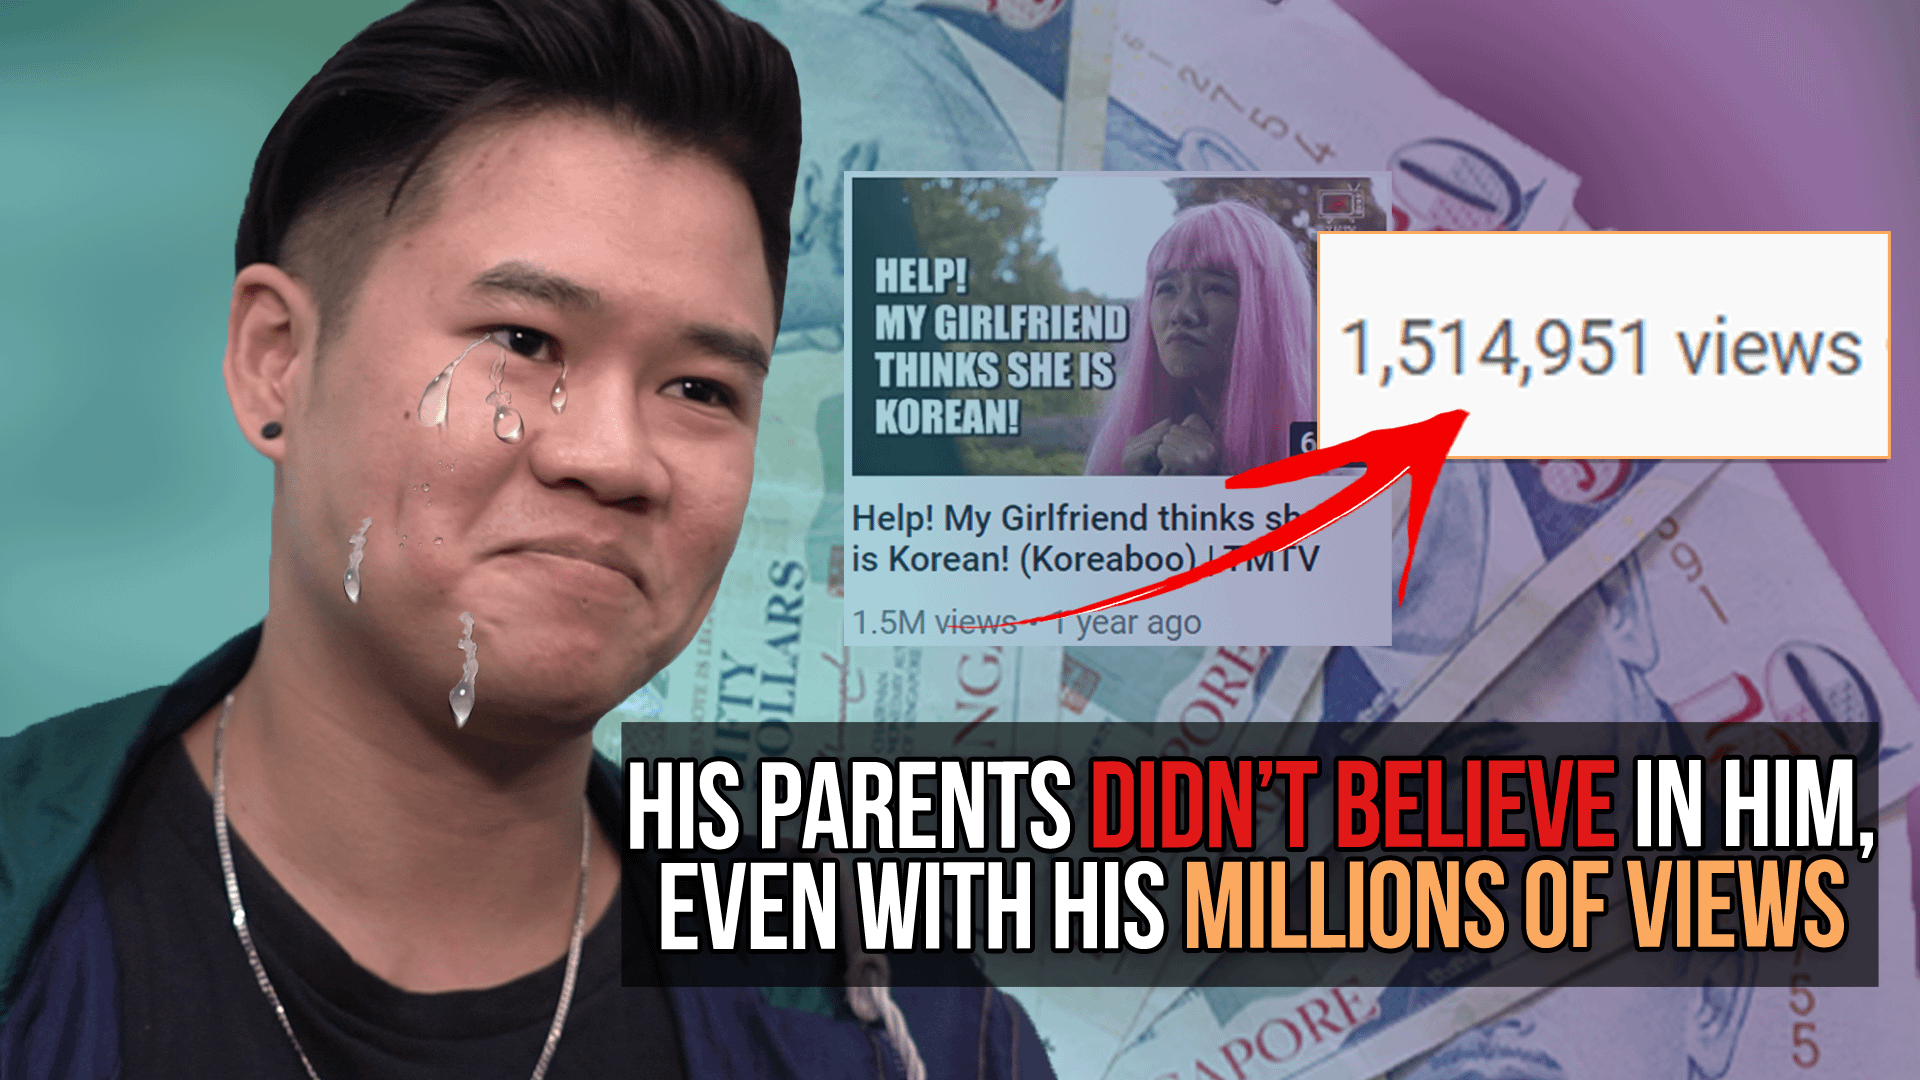 His Parents Didn’t Care About His Millions of Views on Youtube